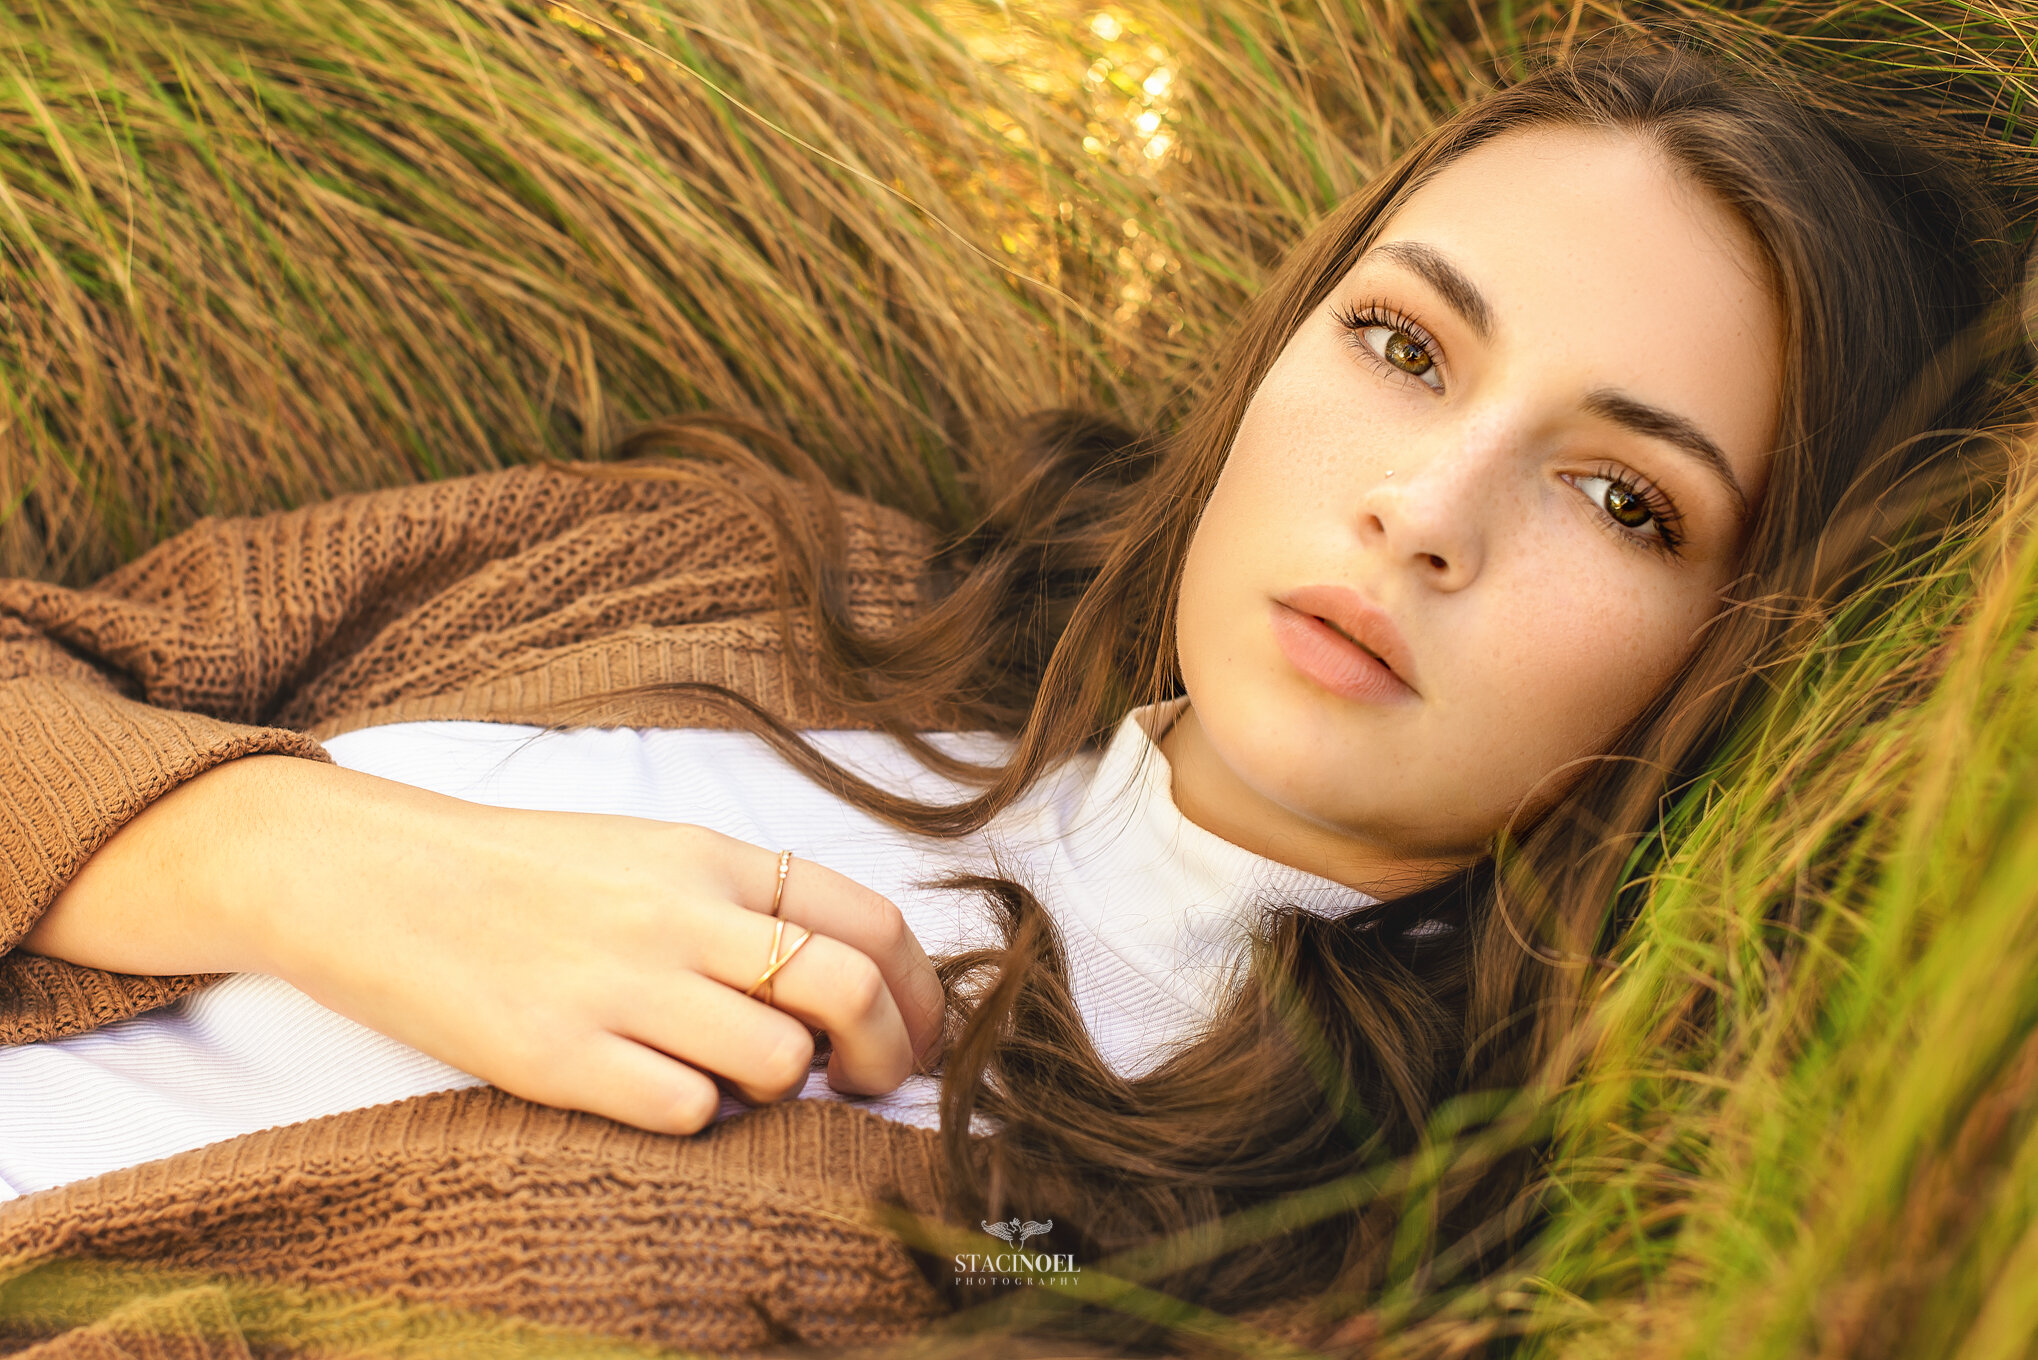  Staci noel photography photographs hickory ridge senior girl for senior portraits outside in natural light in field with tall grass and sunset 